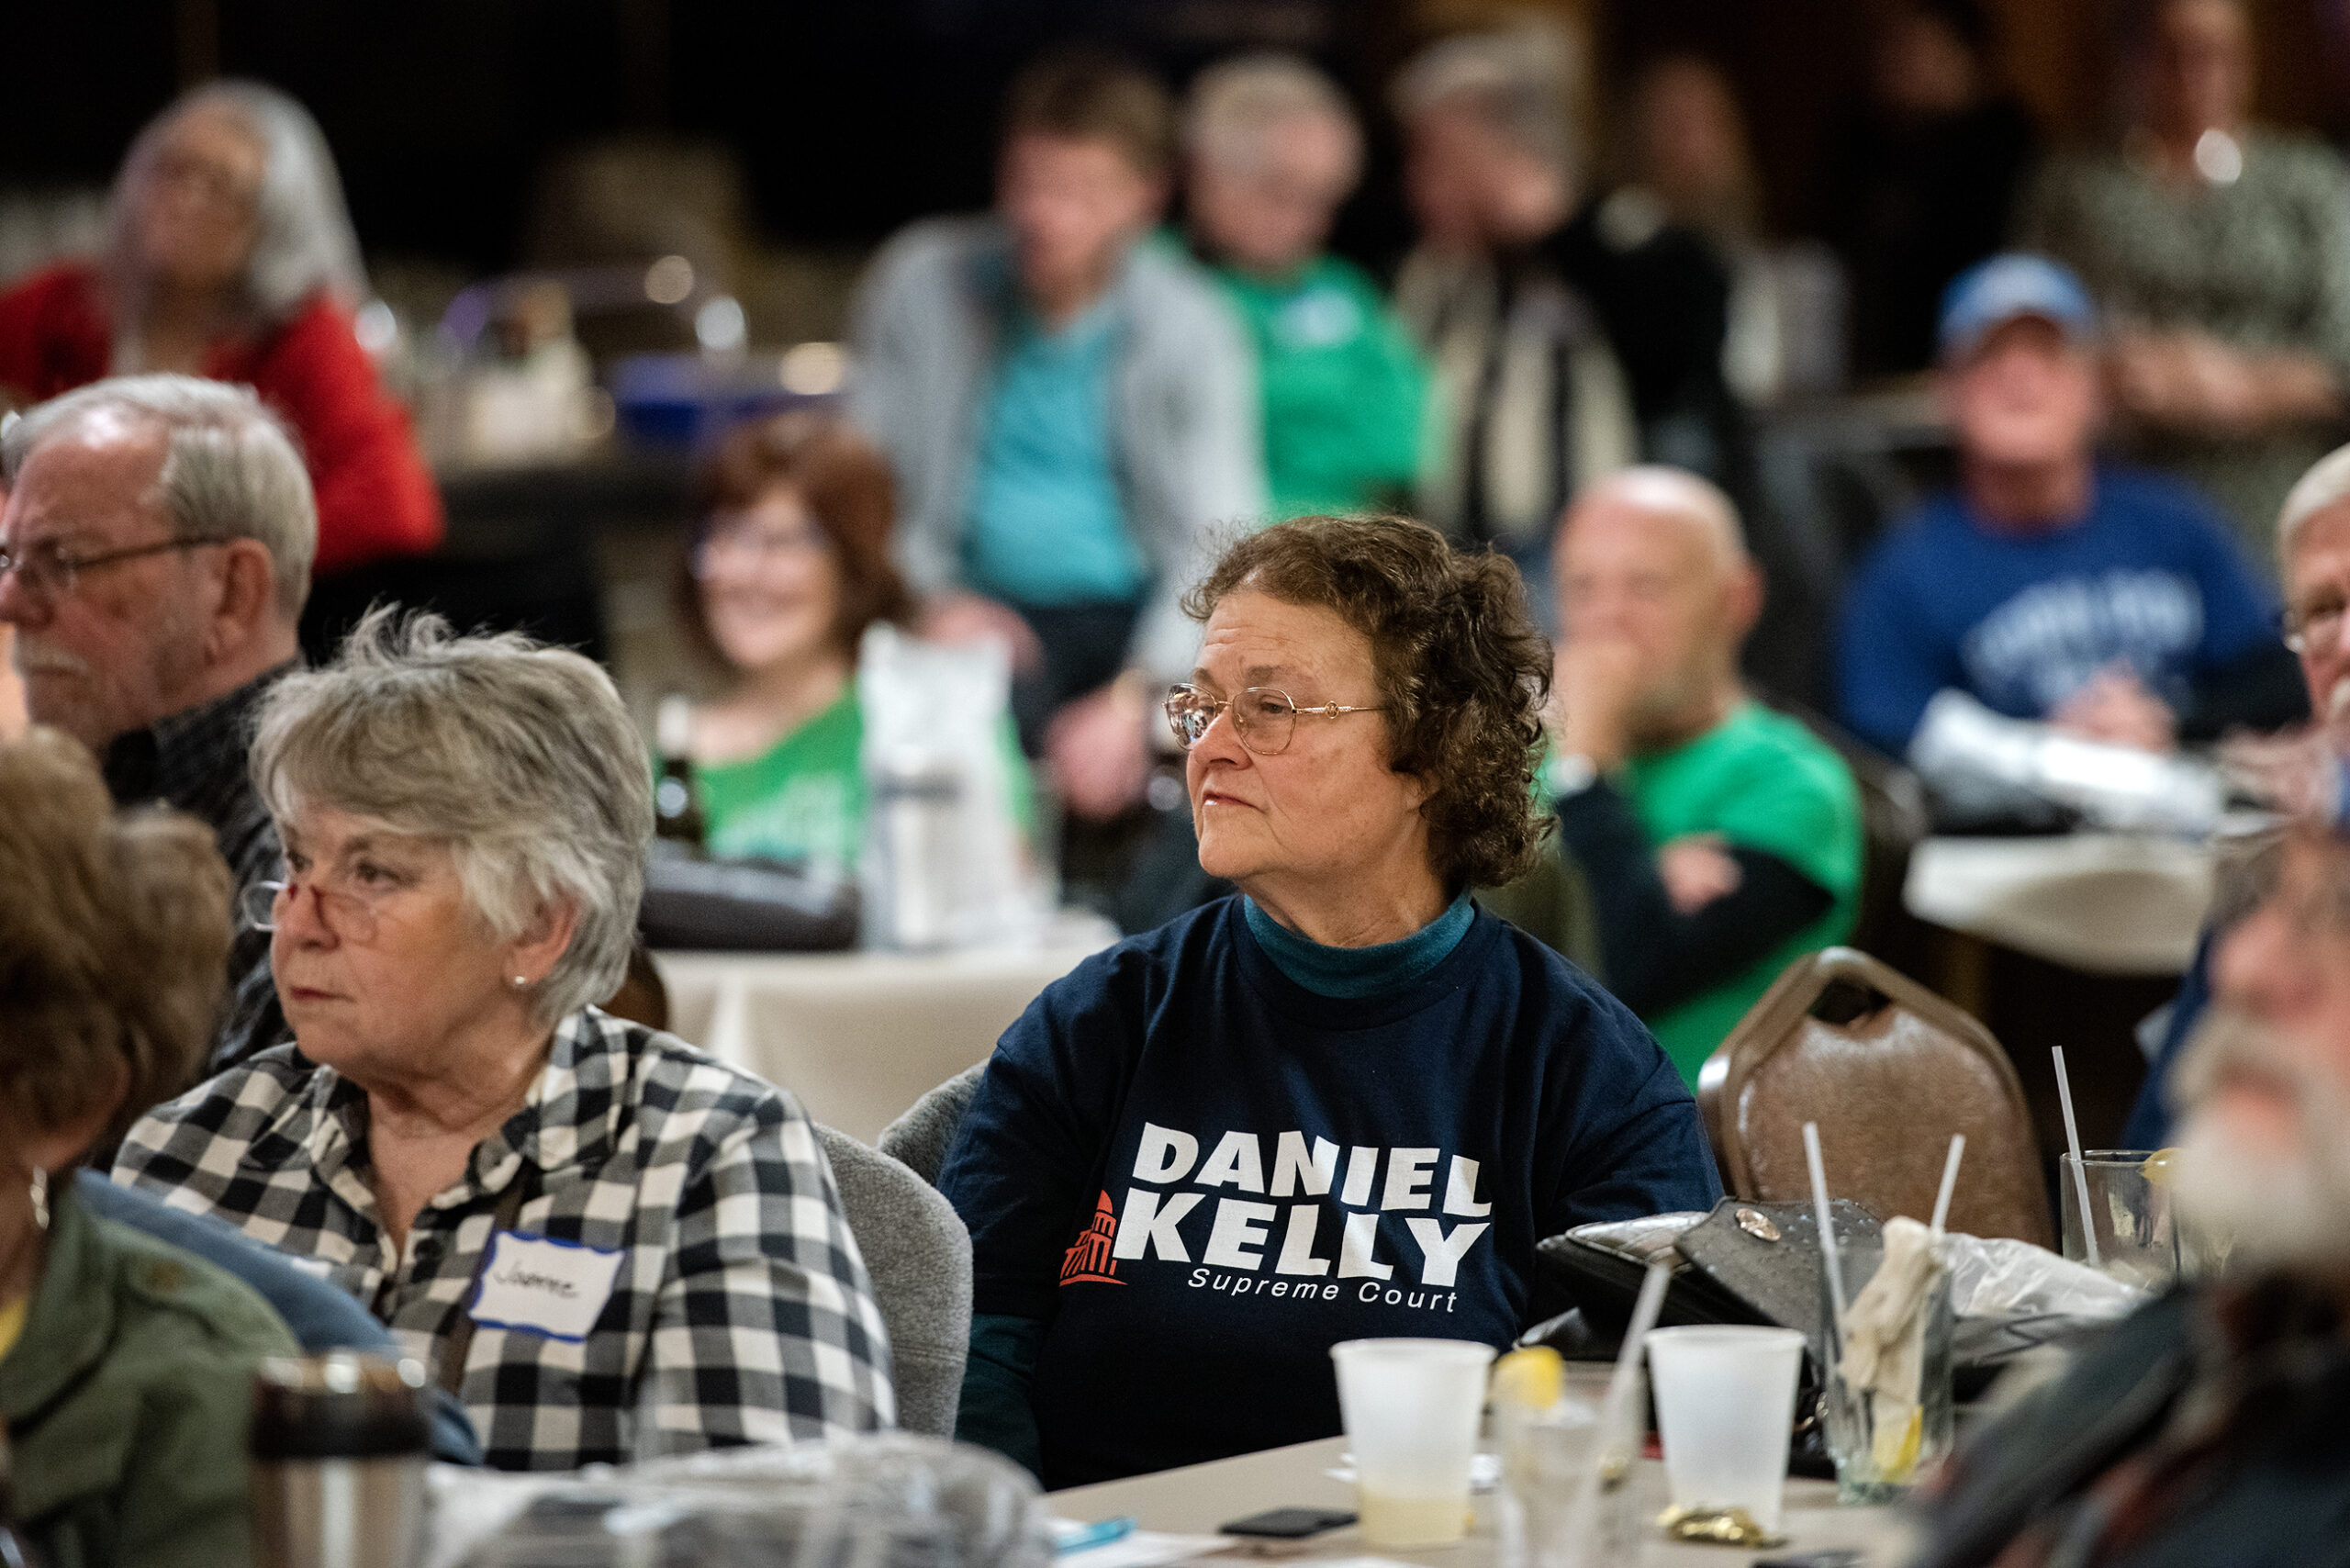 A woman wears a shirt with Dan Kelly's name on it while sitting in a supper club.